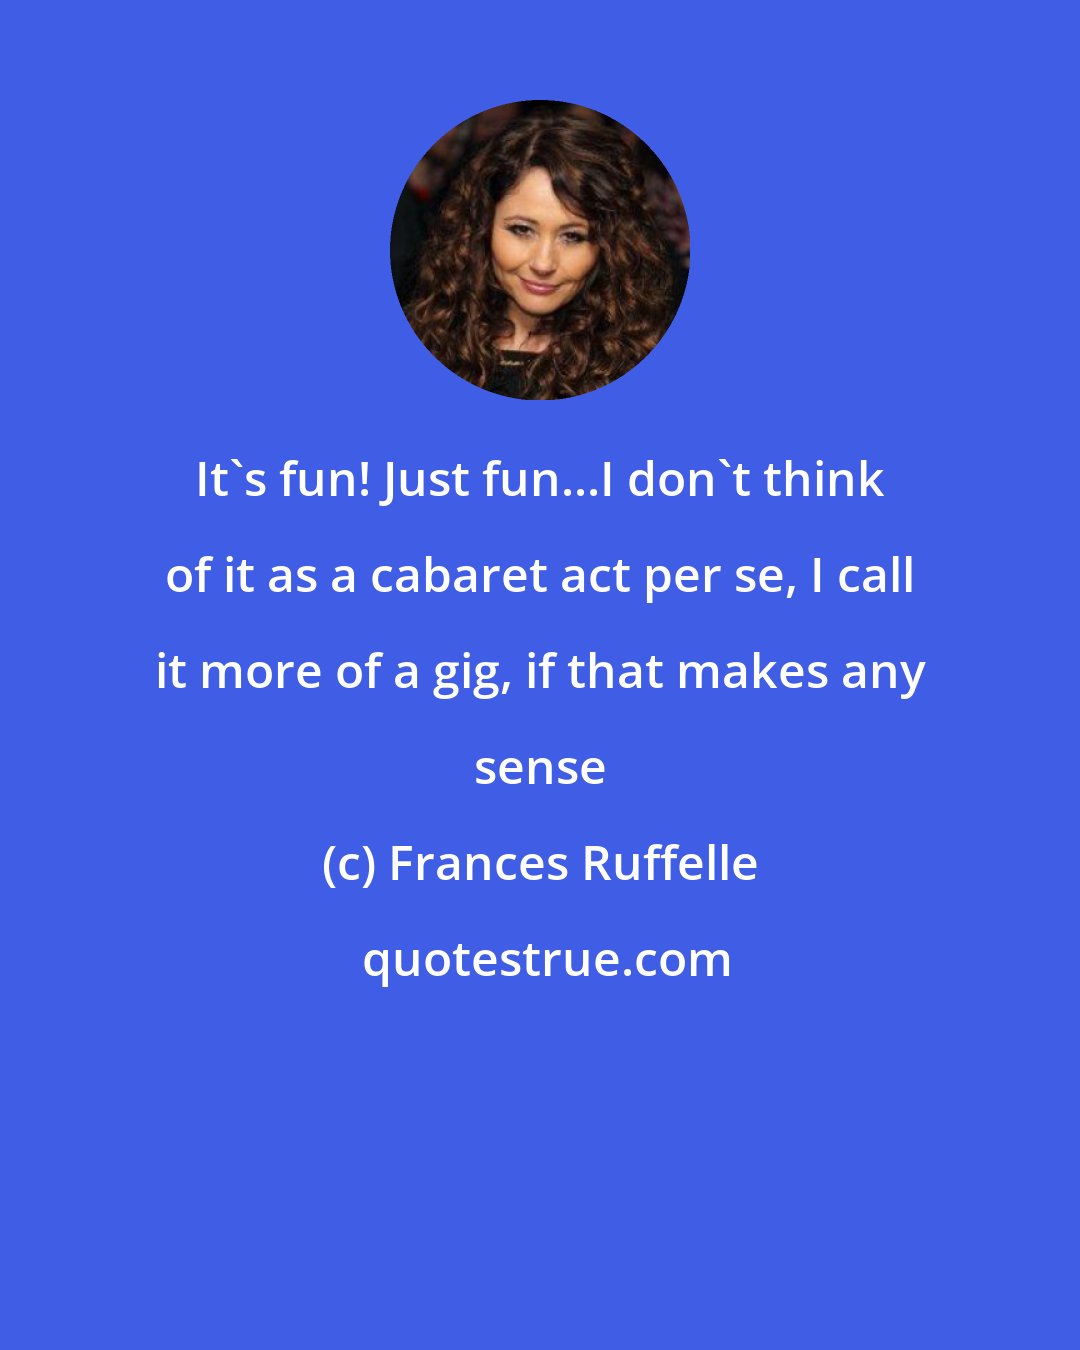 Frances Ruffelle: It's fun! Just fun...I don't think of it as a cabaret act per se, I call it more of a gig, if that makes any sense